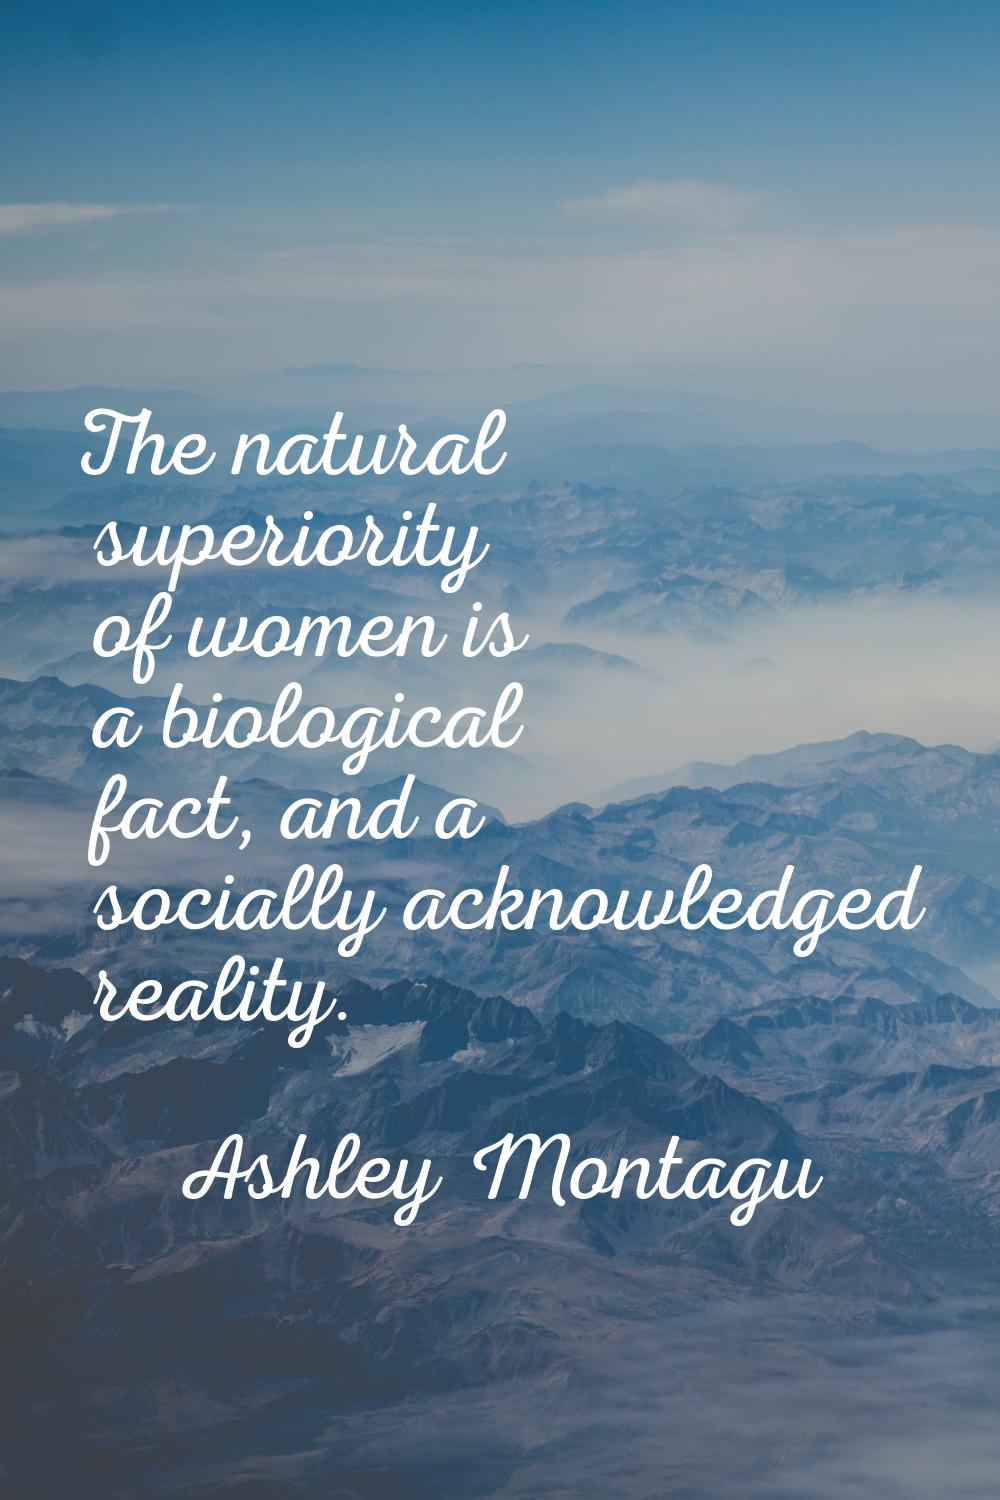 The natural superiority of women is a biological fact, and a socially acknowledged reality.